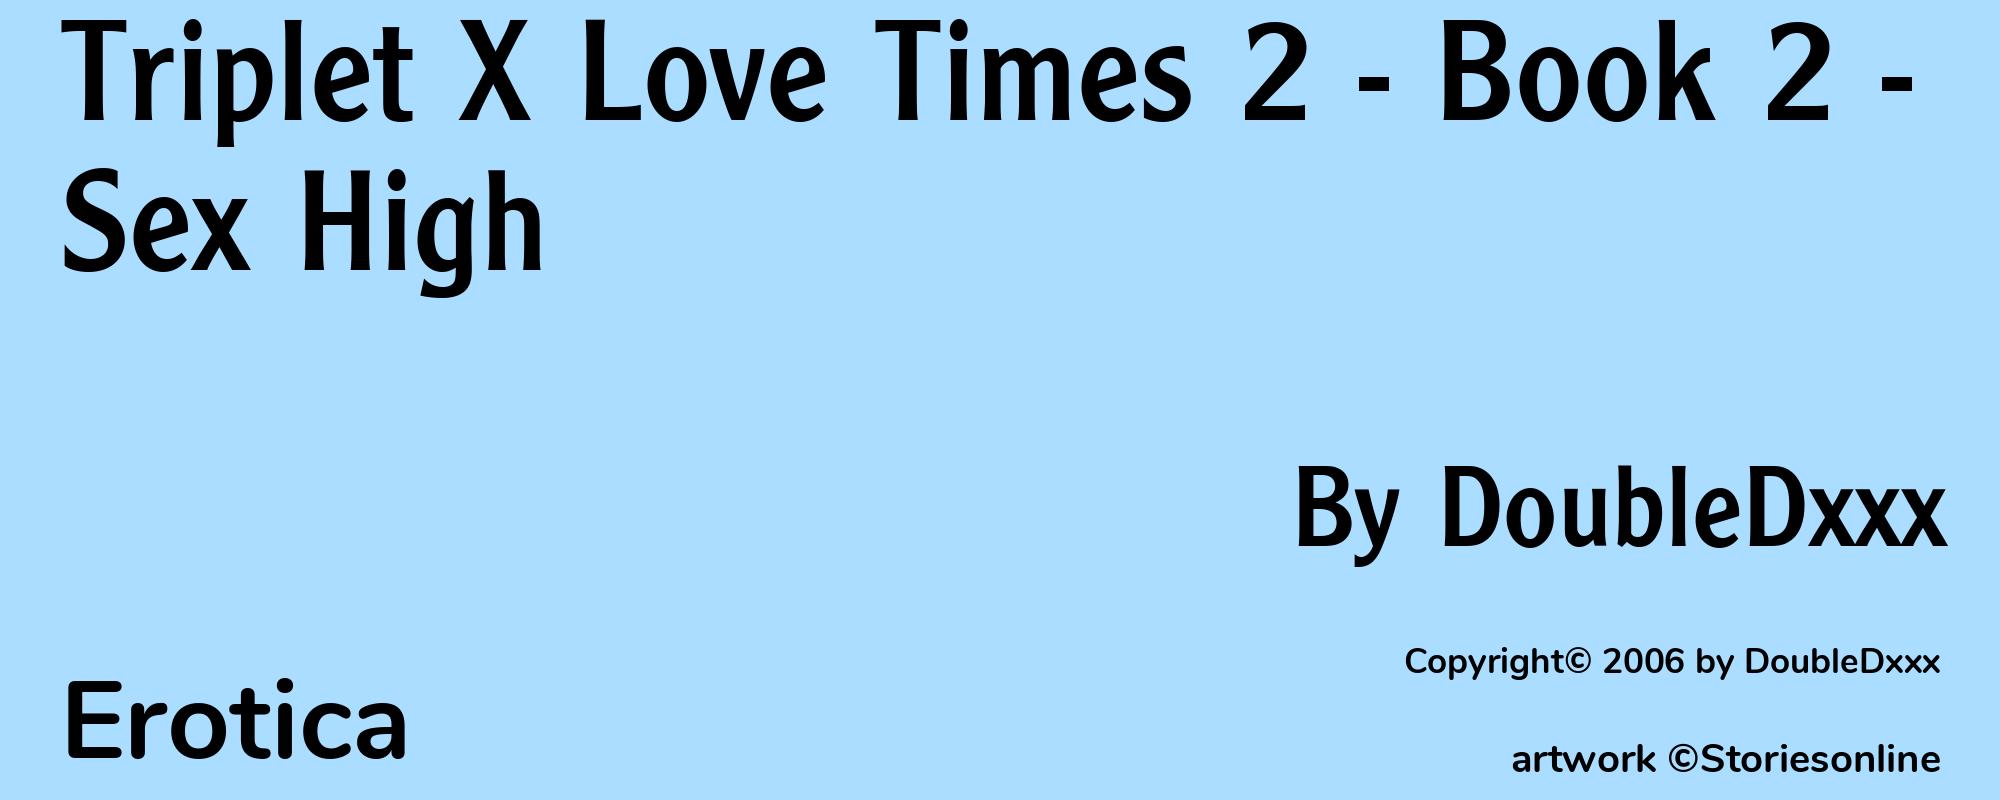 Triplet X Love Times 2 - Book 2 - Sex High - Cover